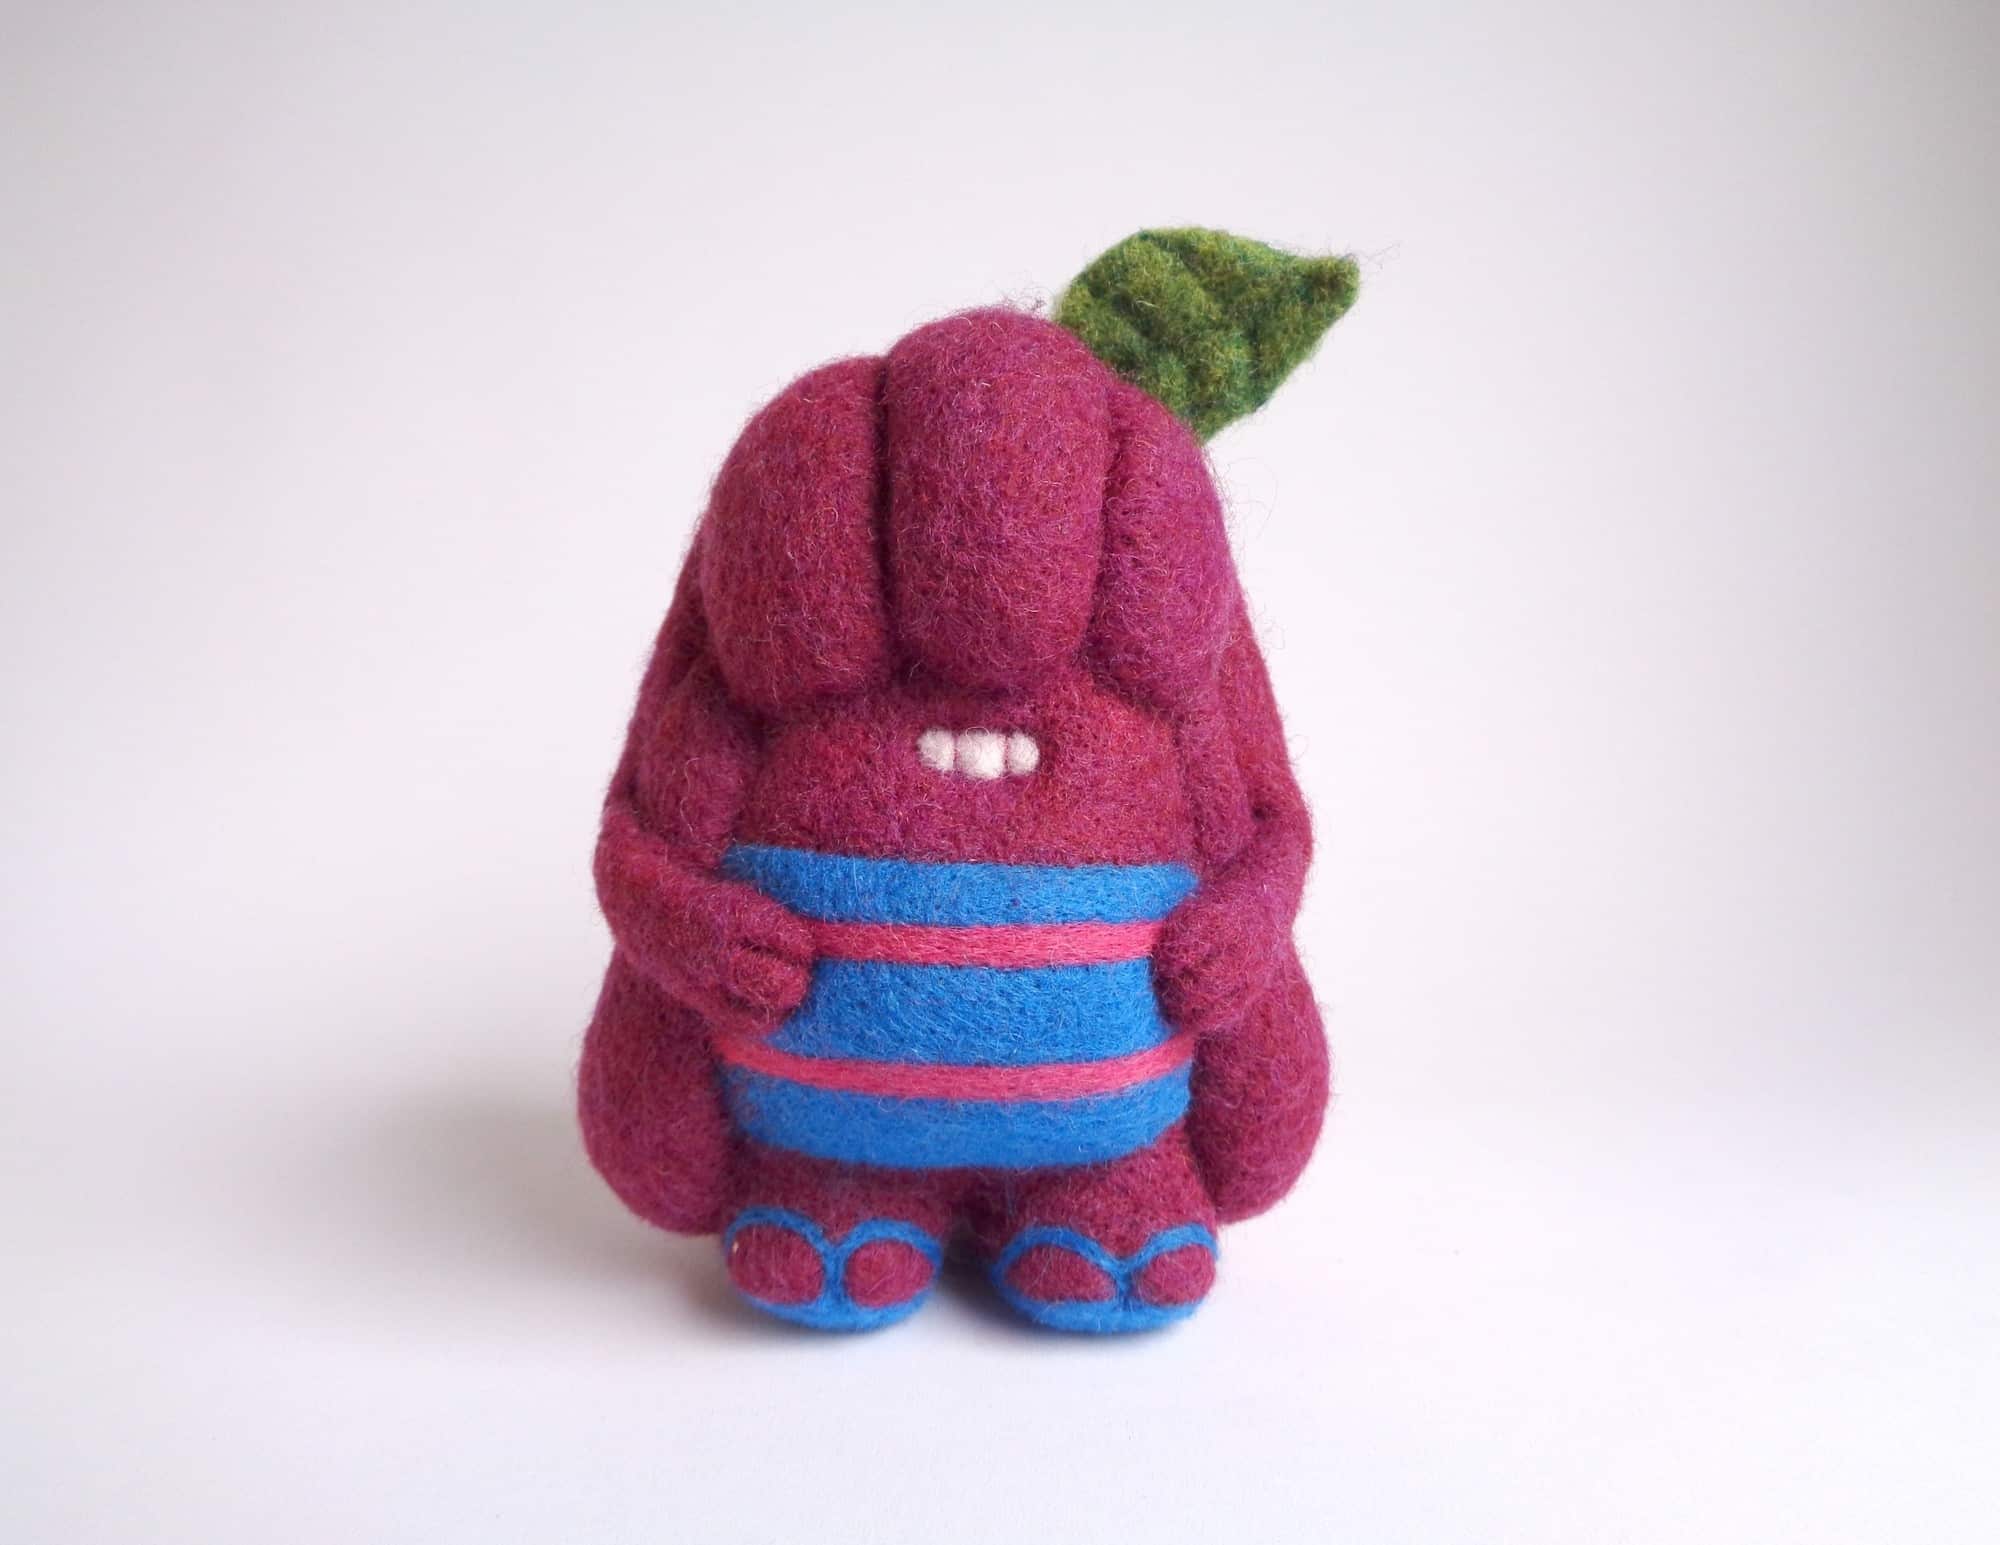 droolwool_plum_toy